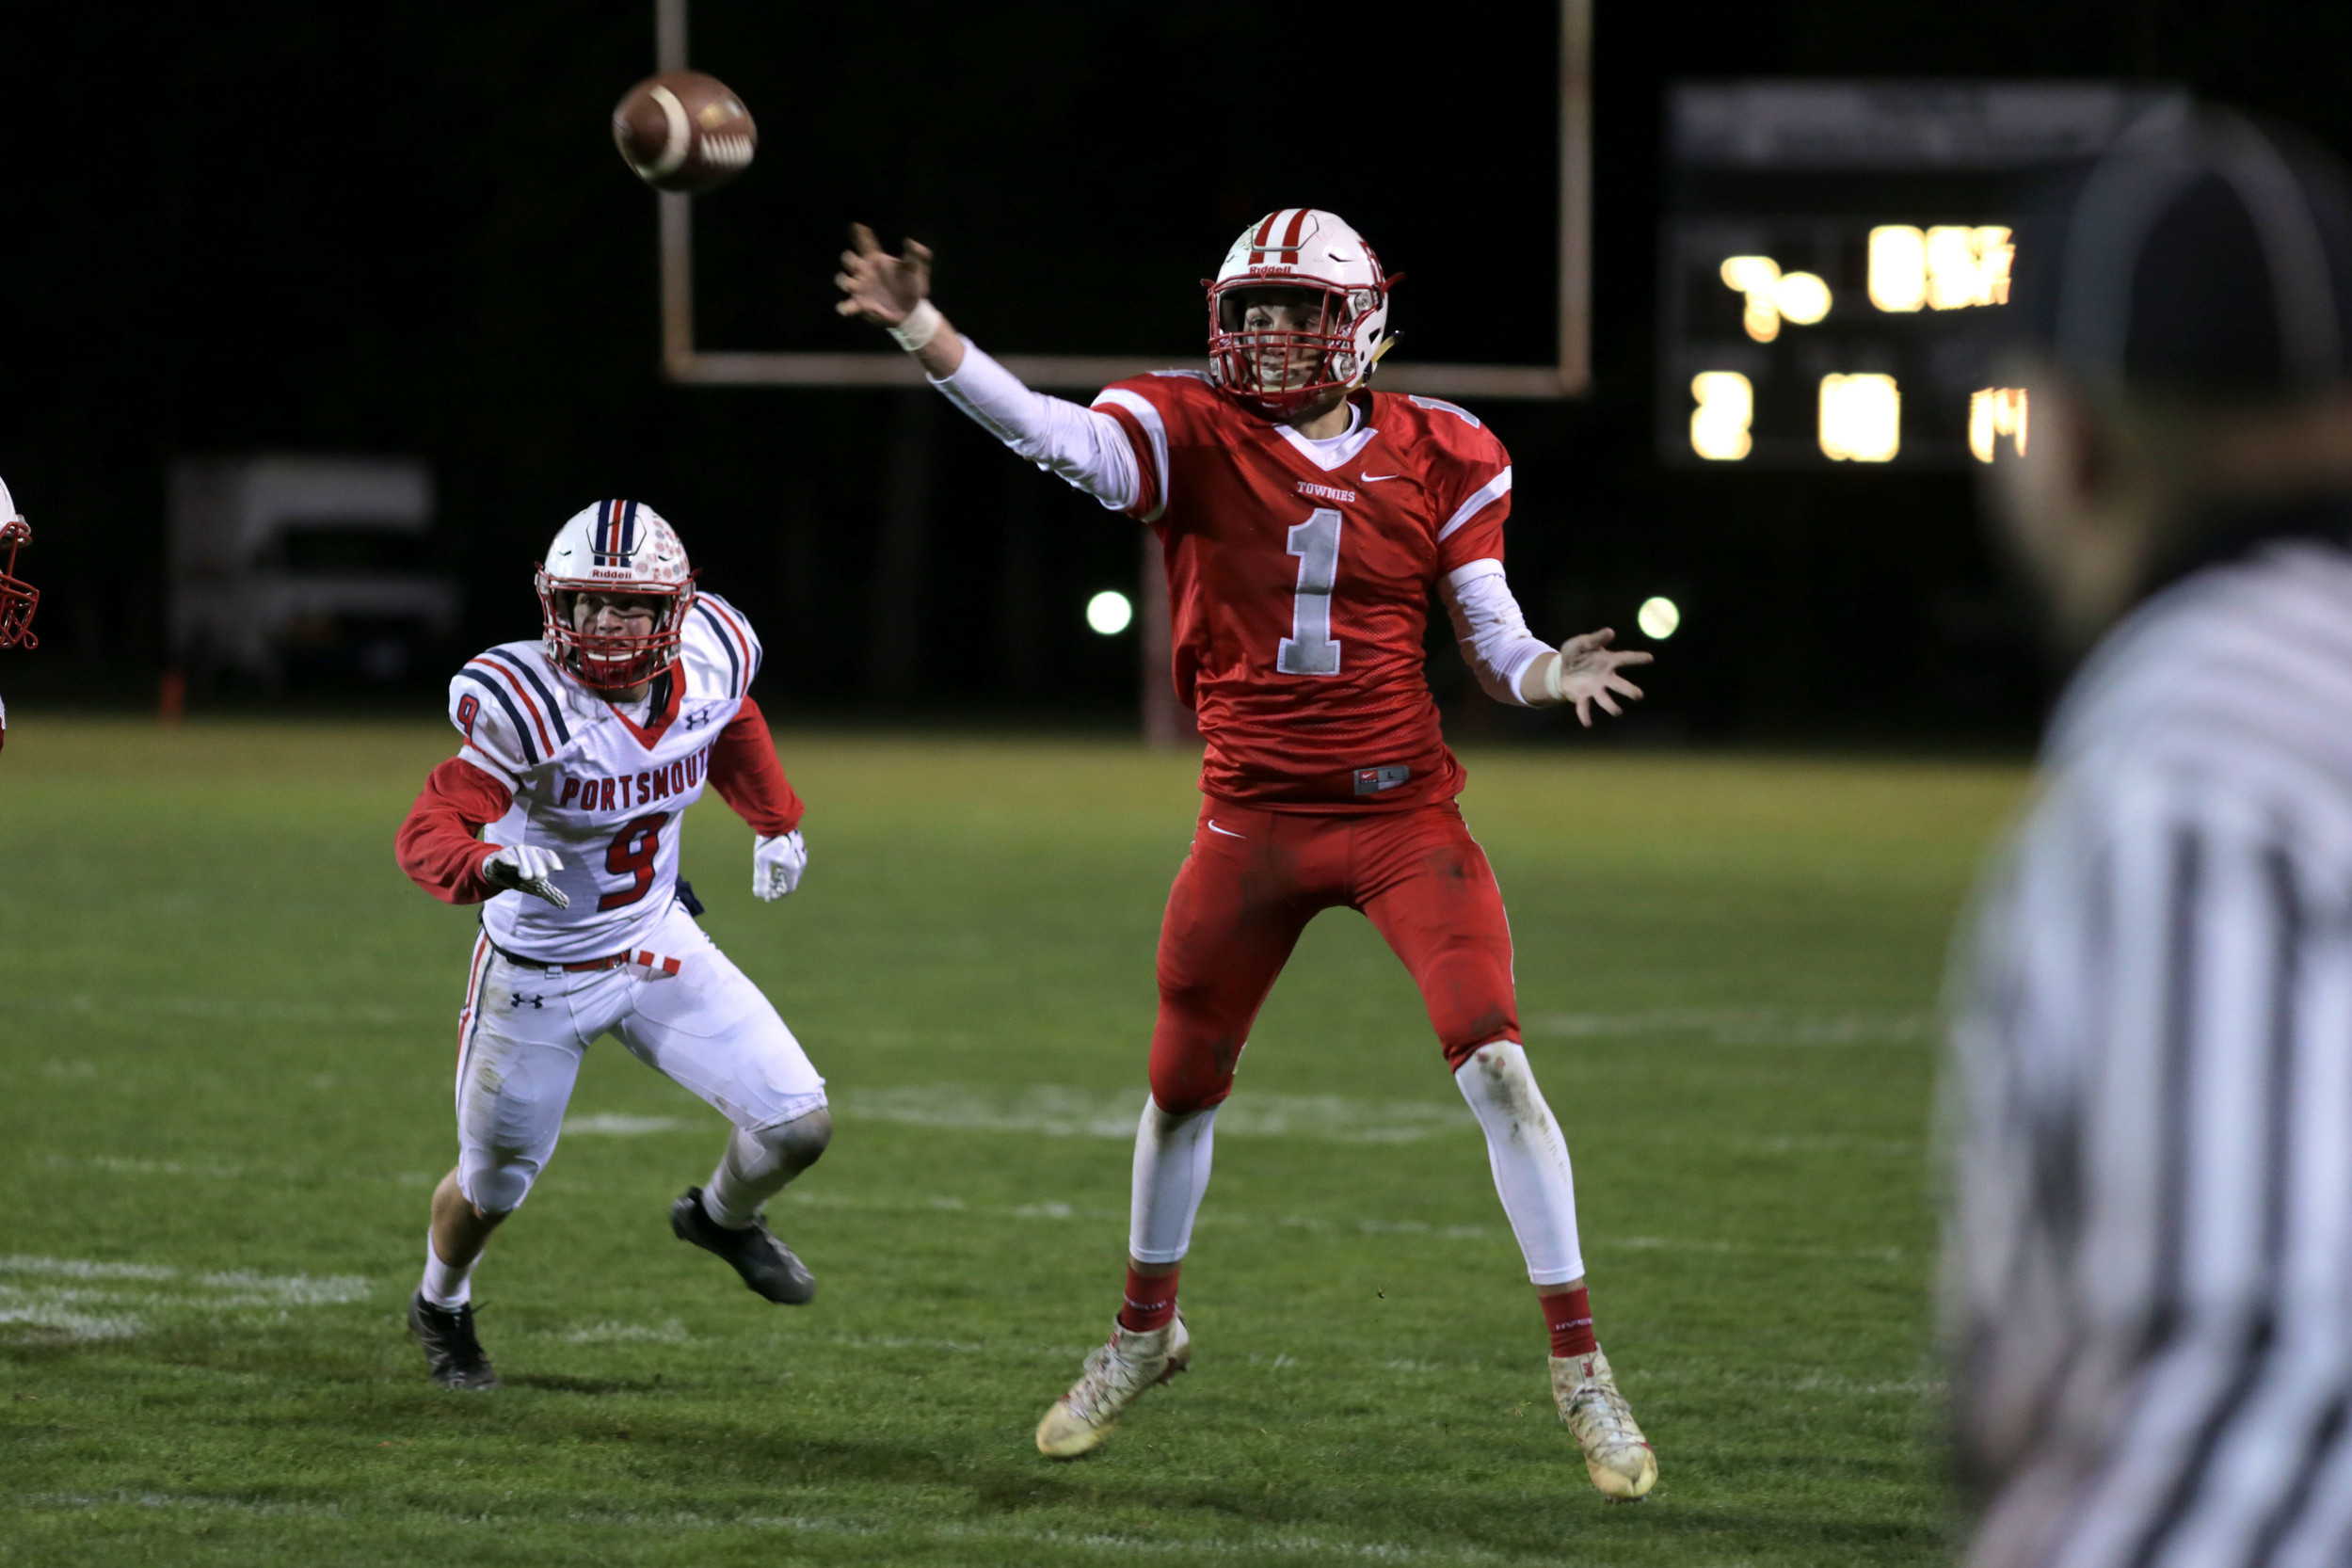 Senior Quarterback Ryan Ellinwood throws to an open receiver after scrambling away from the Portsmouth defense.